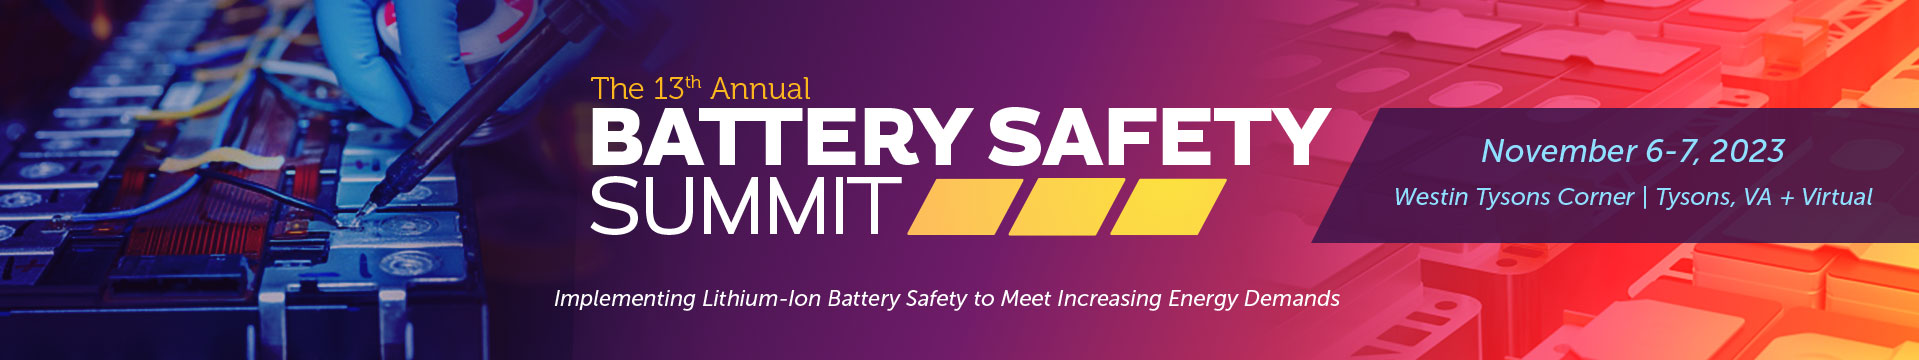 Battery Safety Summit Banner Image